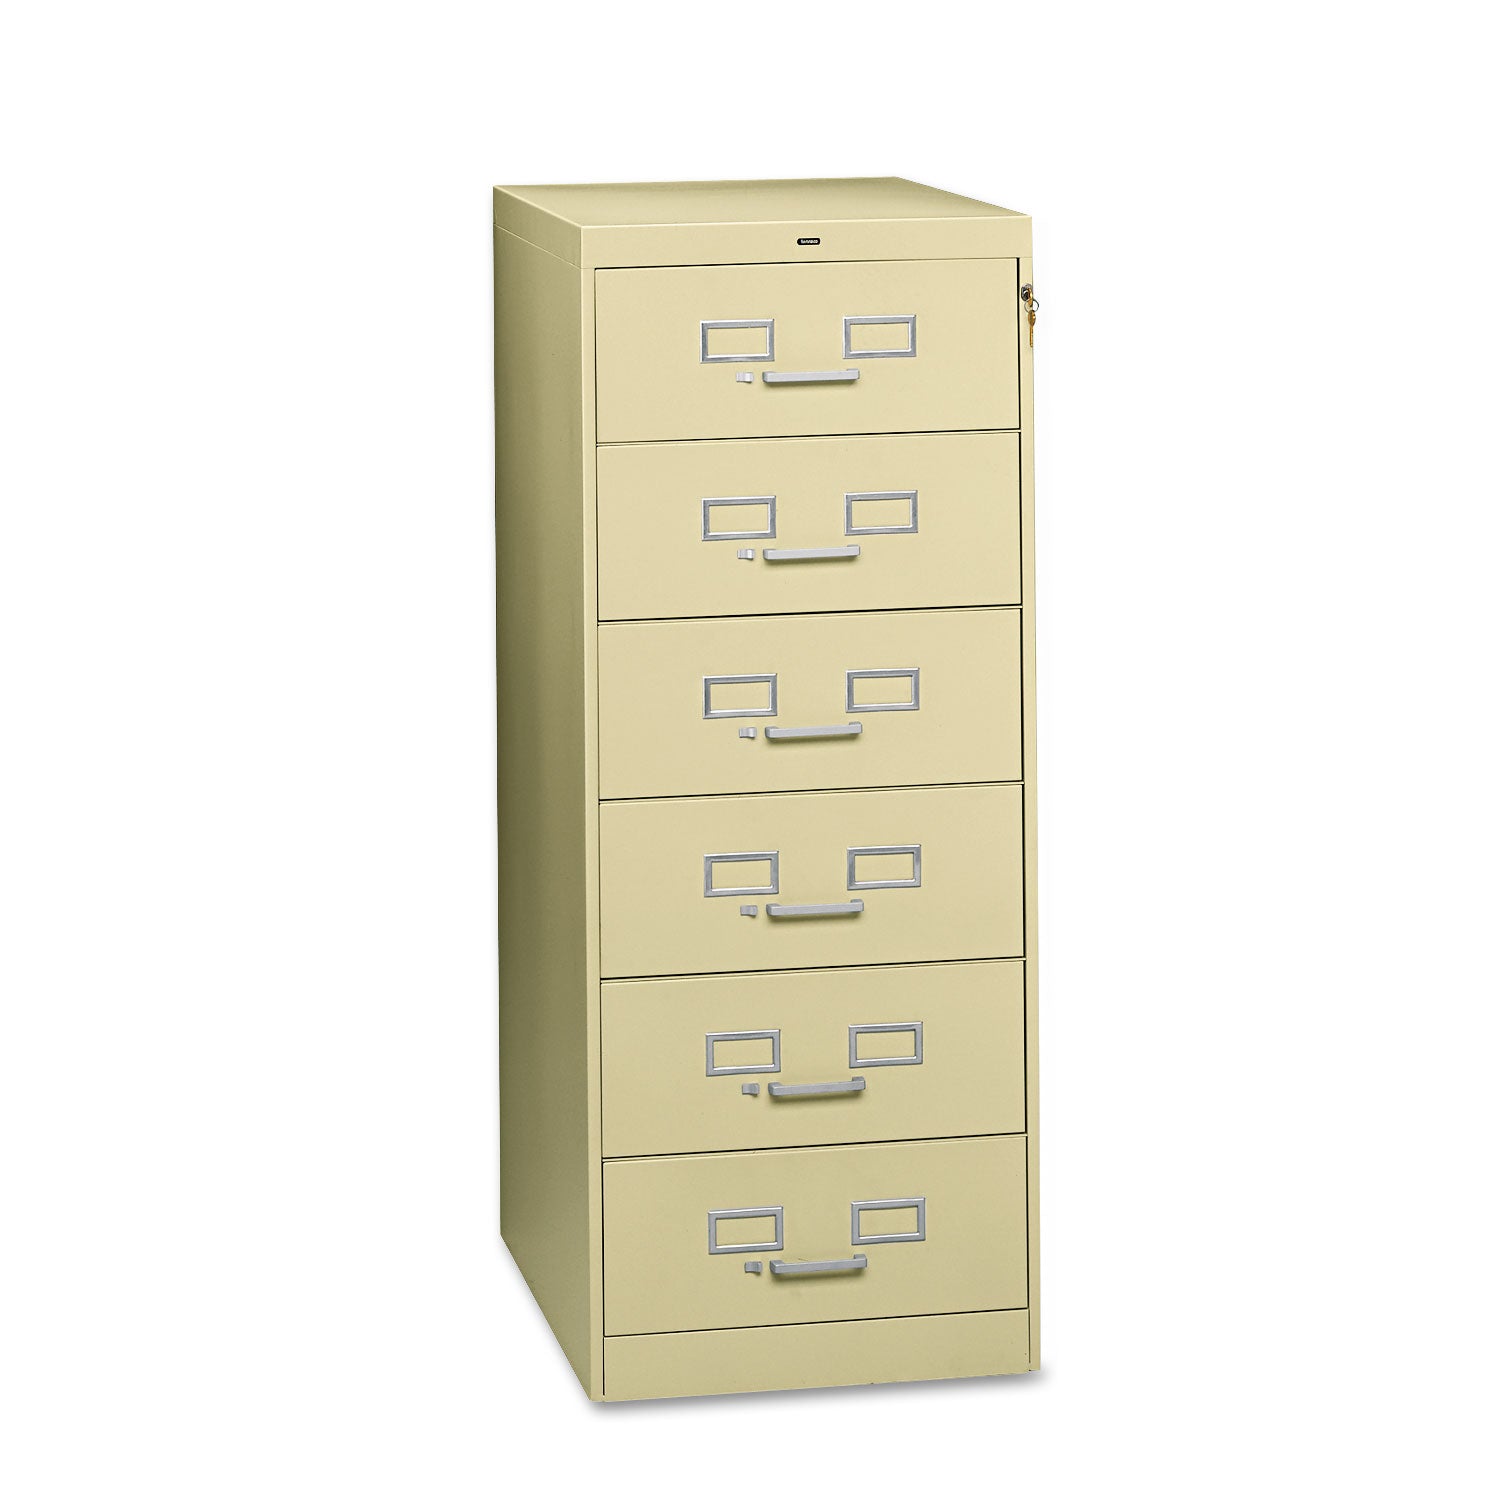 Six-Drawer Multimedia/Card File Cabinet, Putty, 21.25" x 28.5" x 52 - 